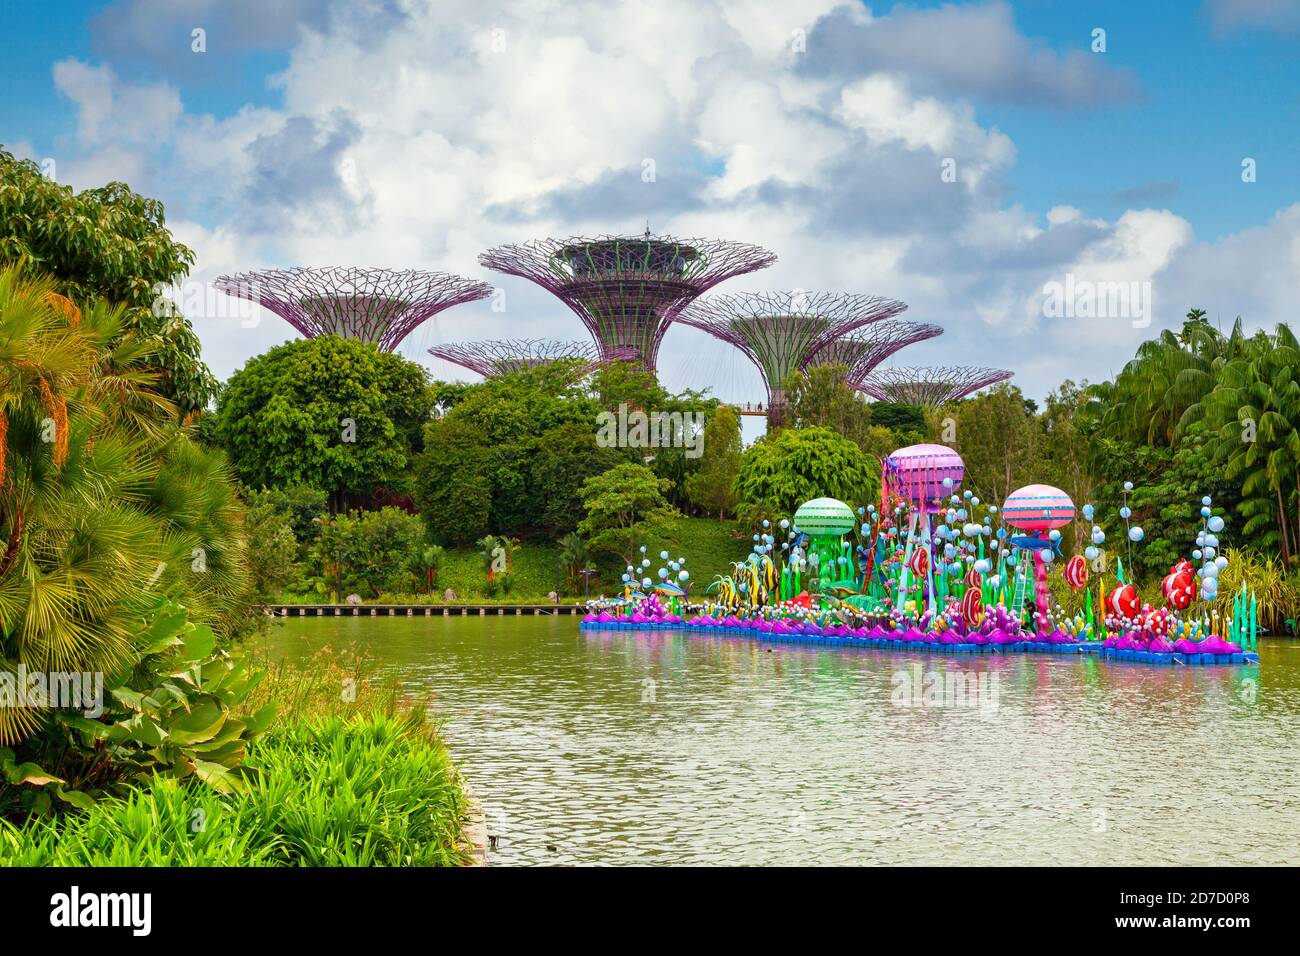 Marina South, Singapore - September 05 2018: The Supertree Grove is a unique vertical gardens in Gardens by the Bay resembling towering trees, with la Stock Photo